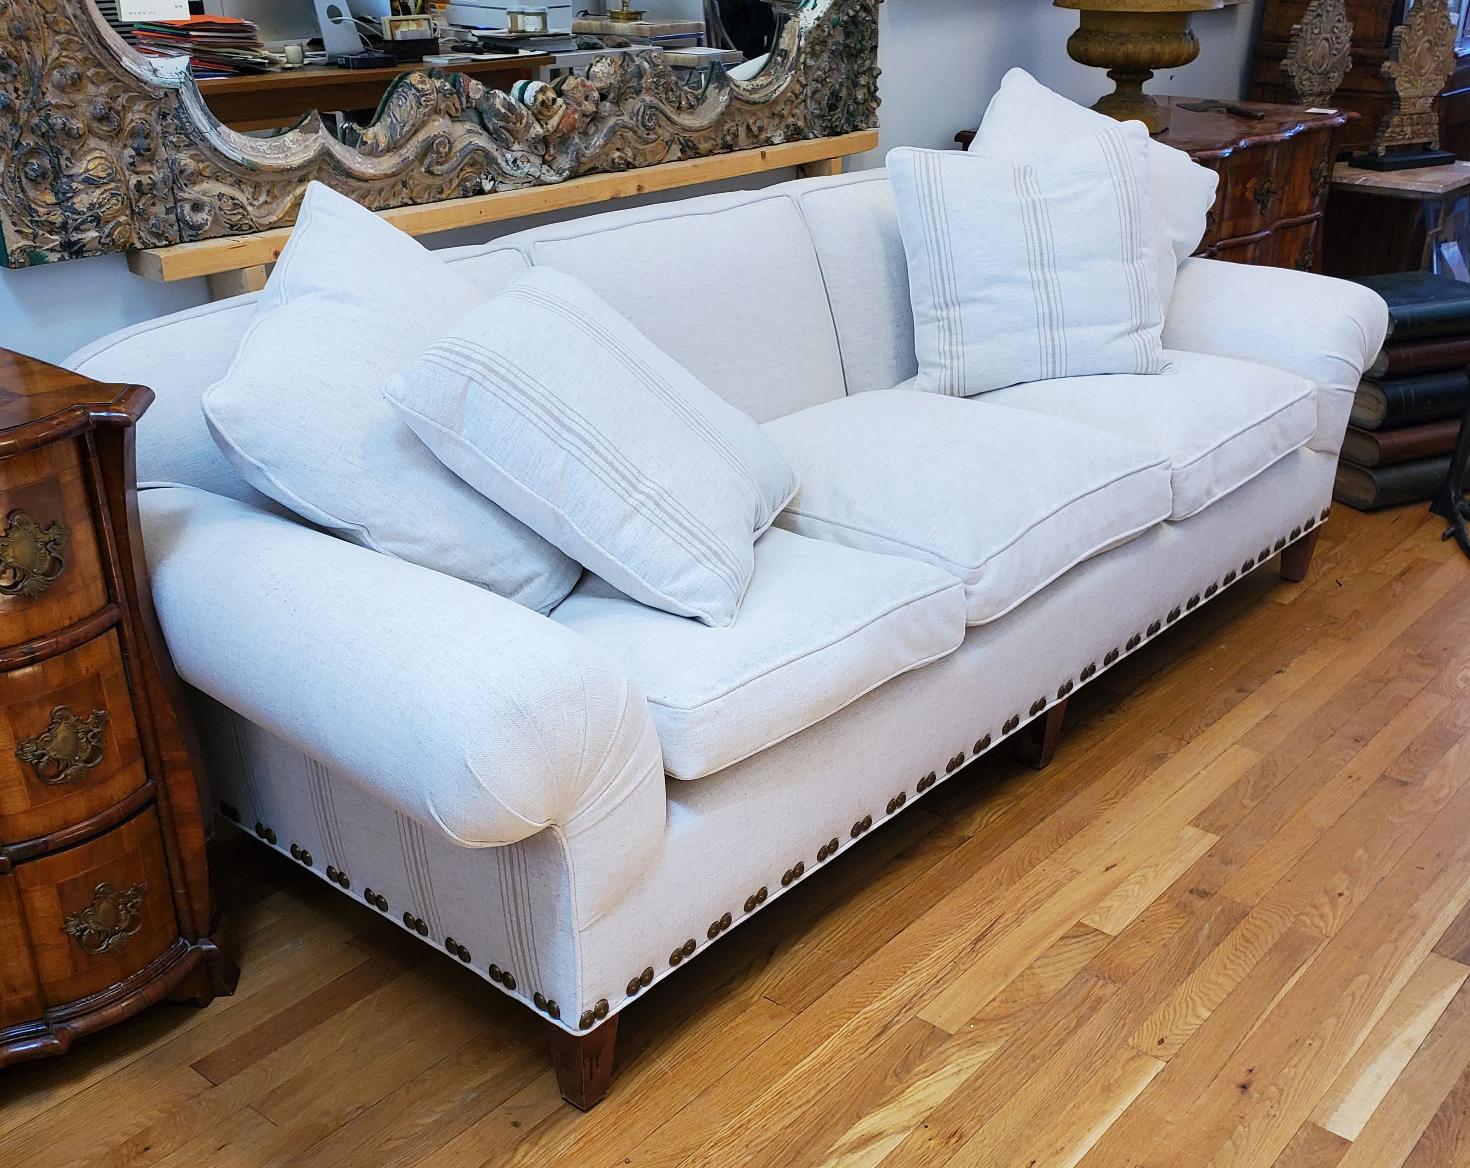 Custom Designed Georgian Style Sofa with White Crypton Upholstery. Rolled arms with loose back and seat “Down/Feather” cushions. Remarkably comfortable. Recently upholstered in Crypton fabric with decorative nailhead trim. 20th Century. Measures: